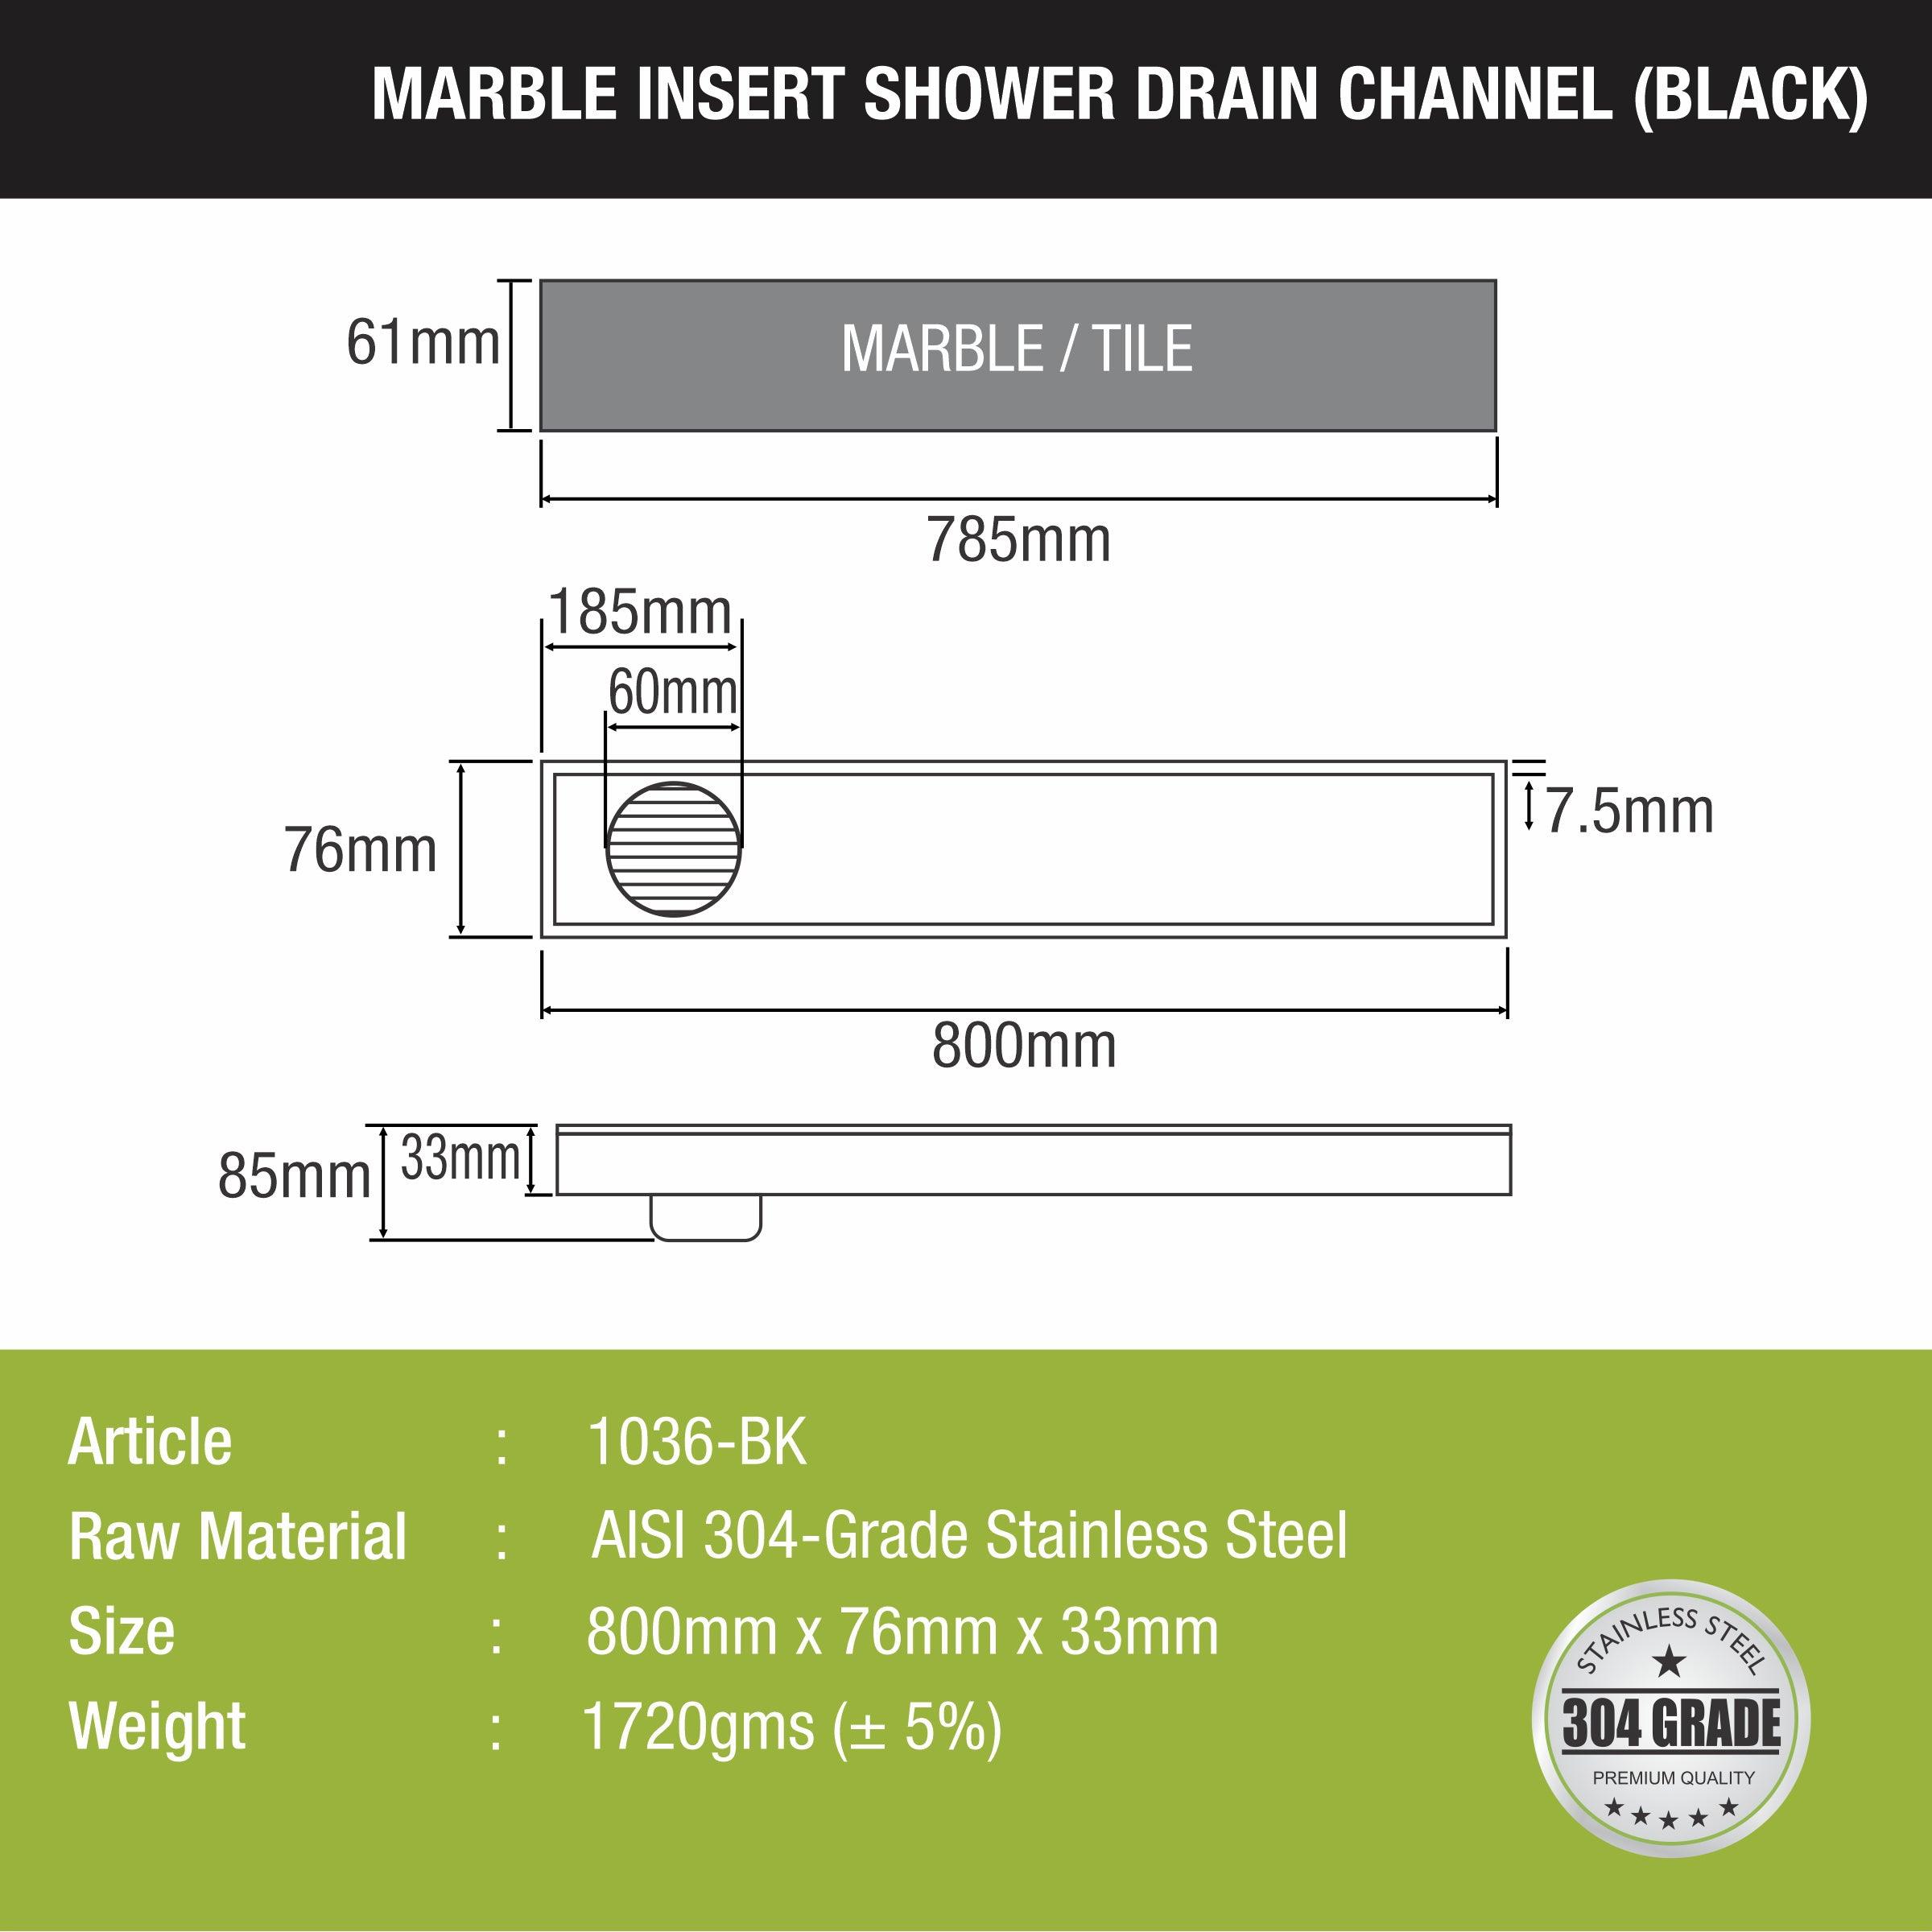 Marble Insert Shower Drain Channel - Black (32 x 3 Inches) size and measurement